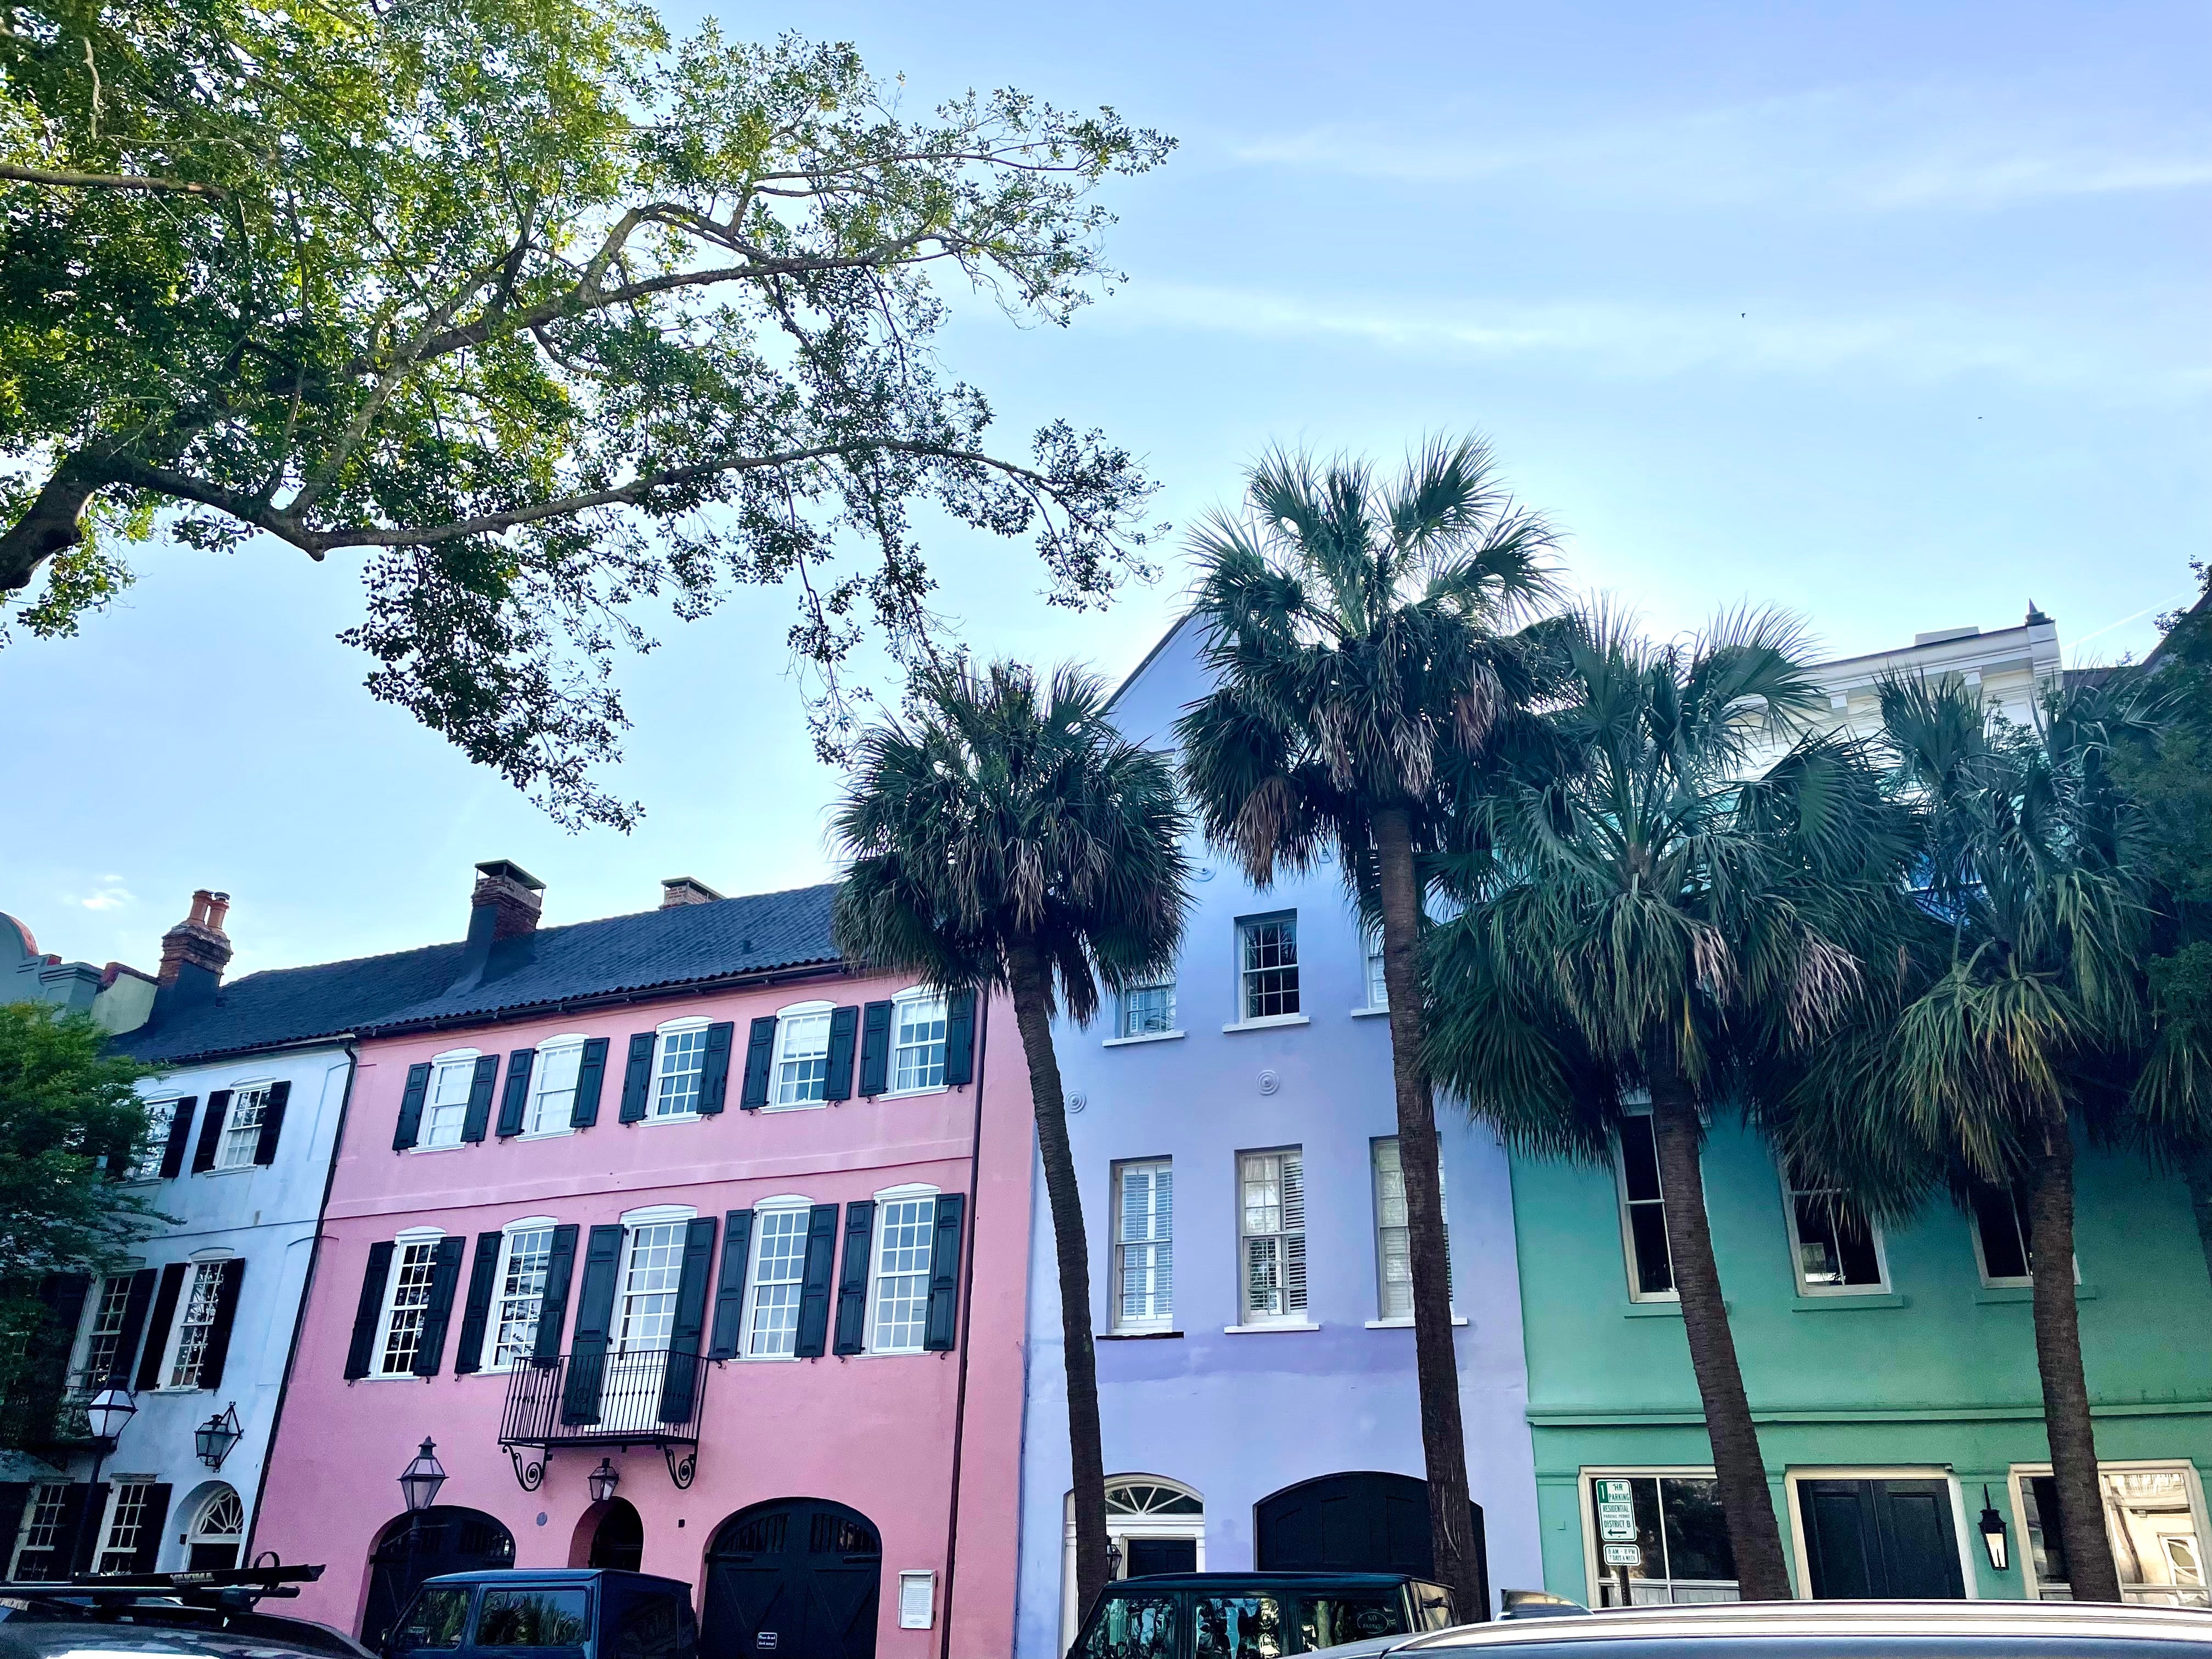 A trip to Charleston should include a stroll past the colourful houses of Rainbow Row